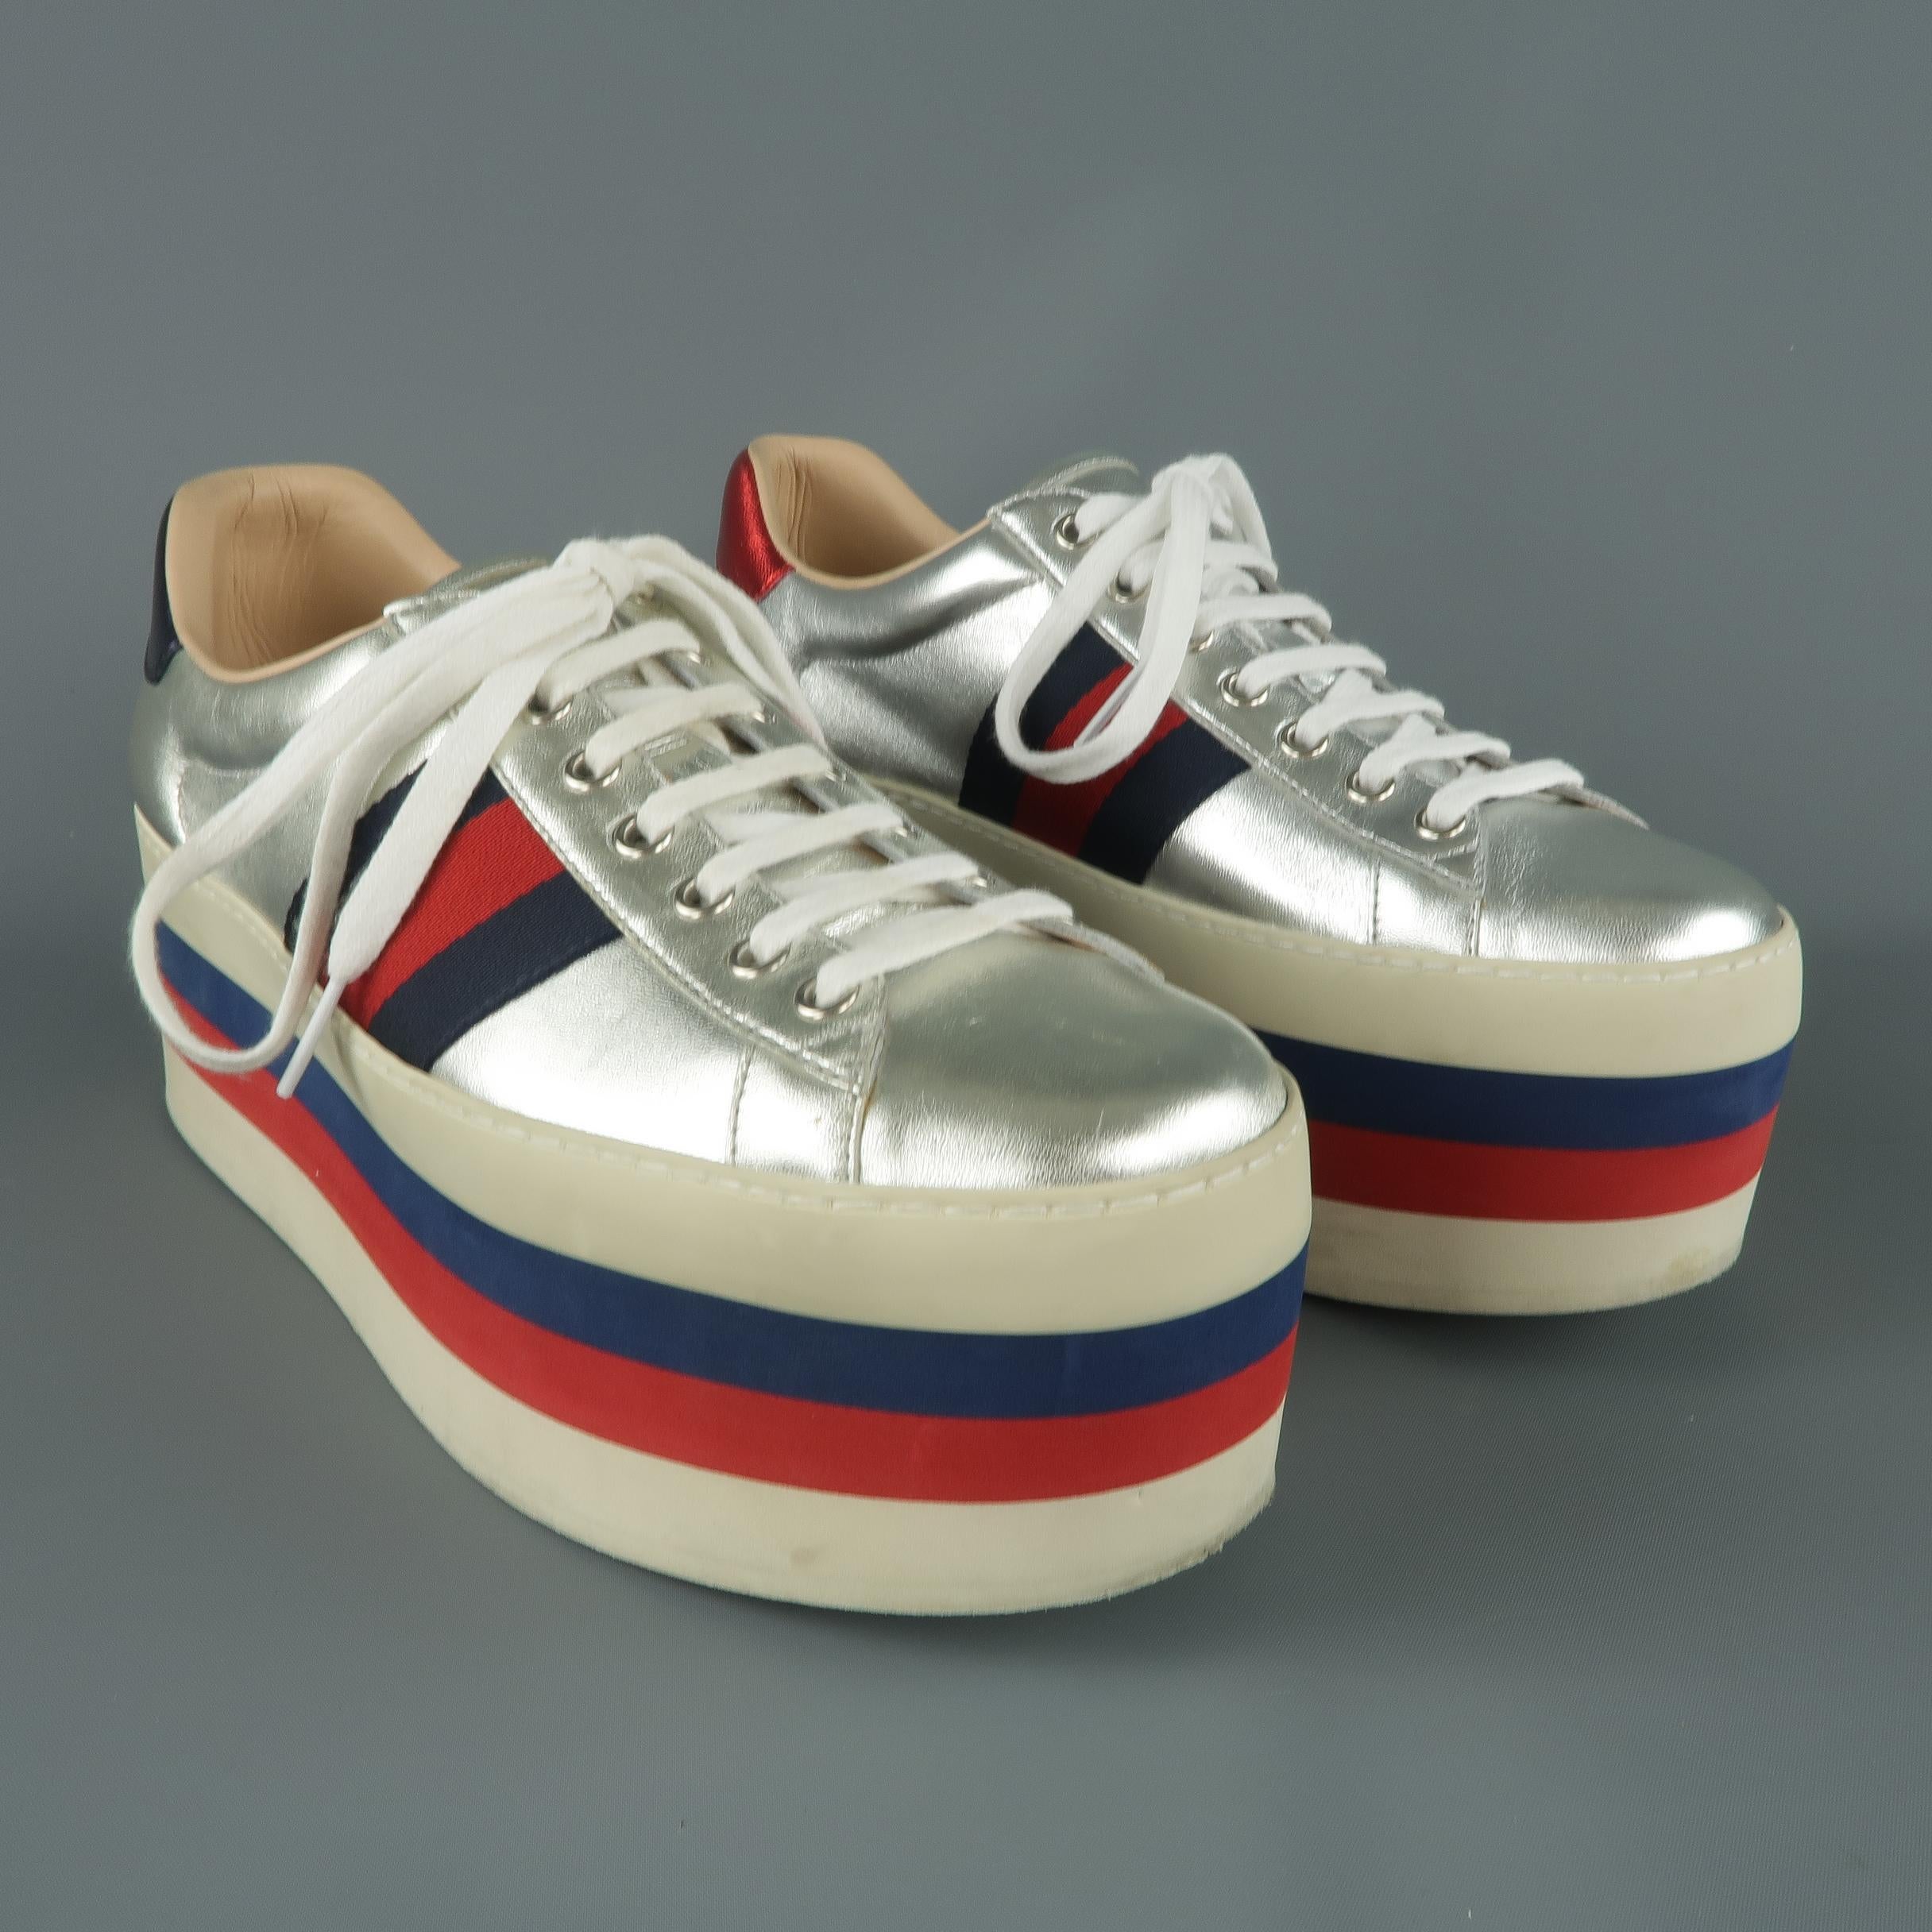 Beige GUCCI Taille 8 Silver Metallic Leather Striped Platform Sneakers Shoes